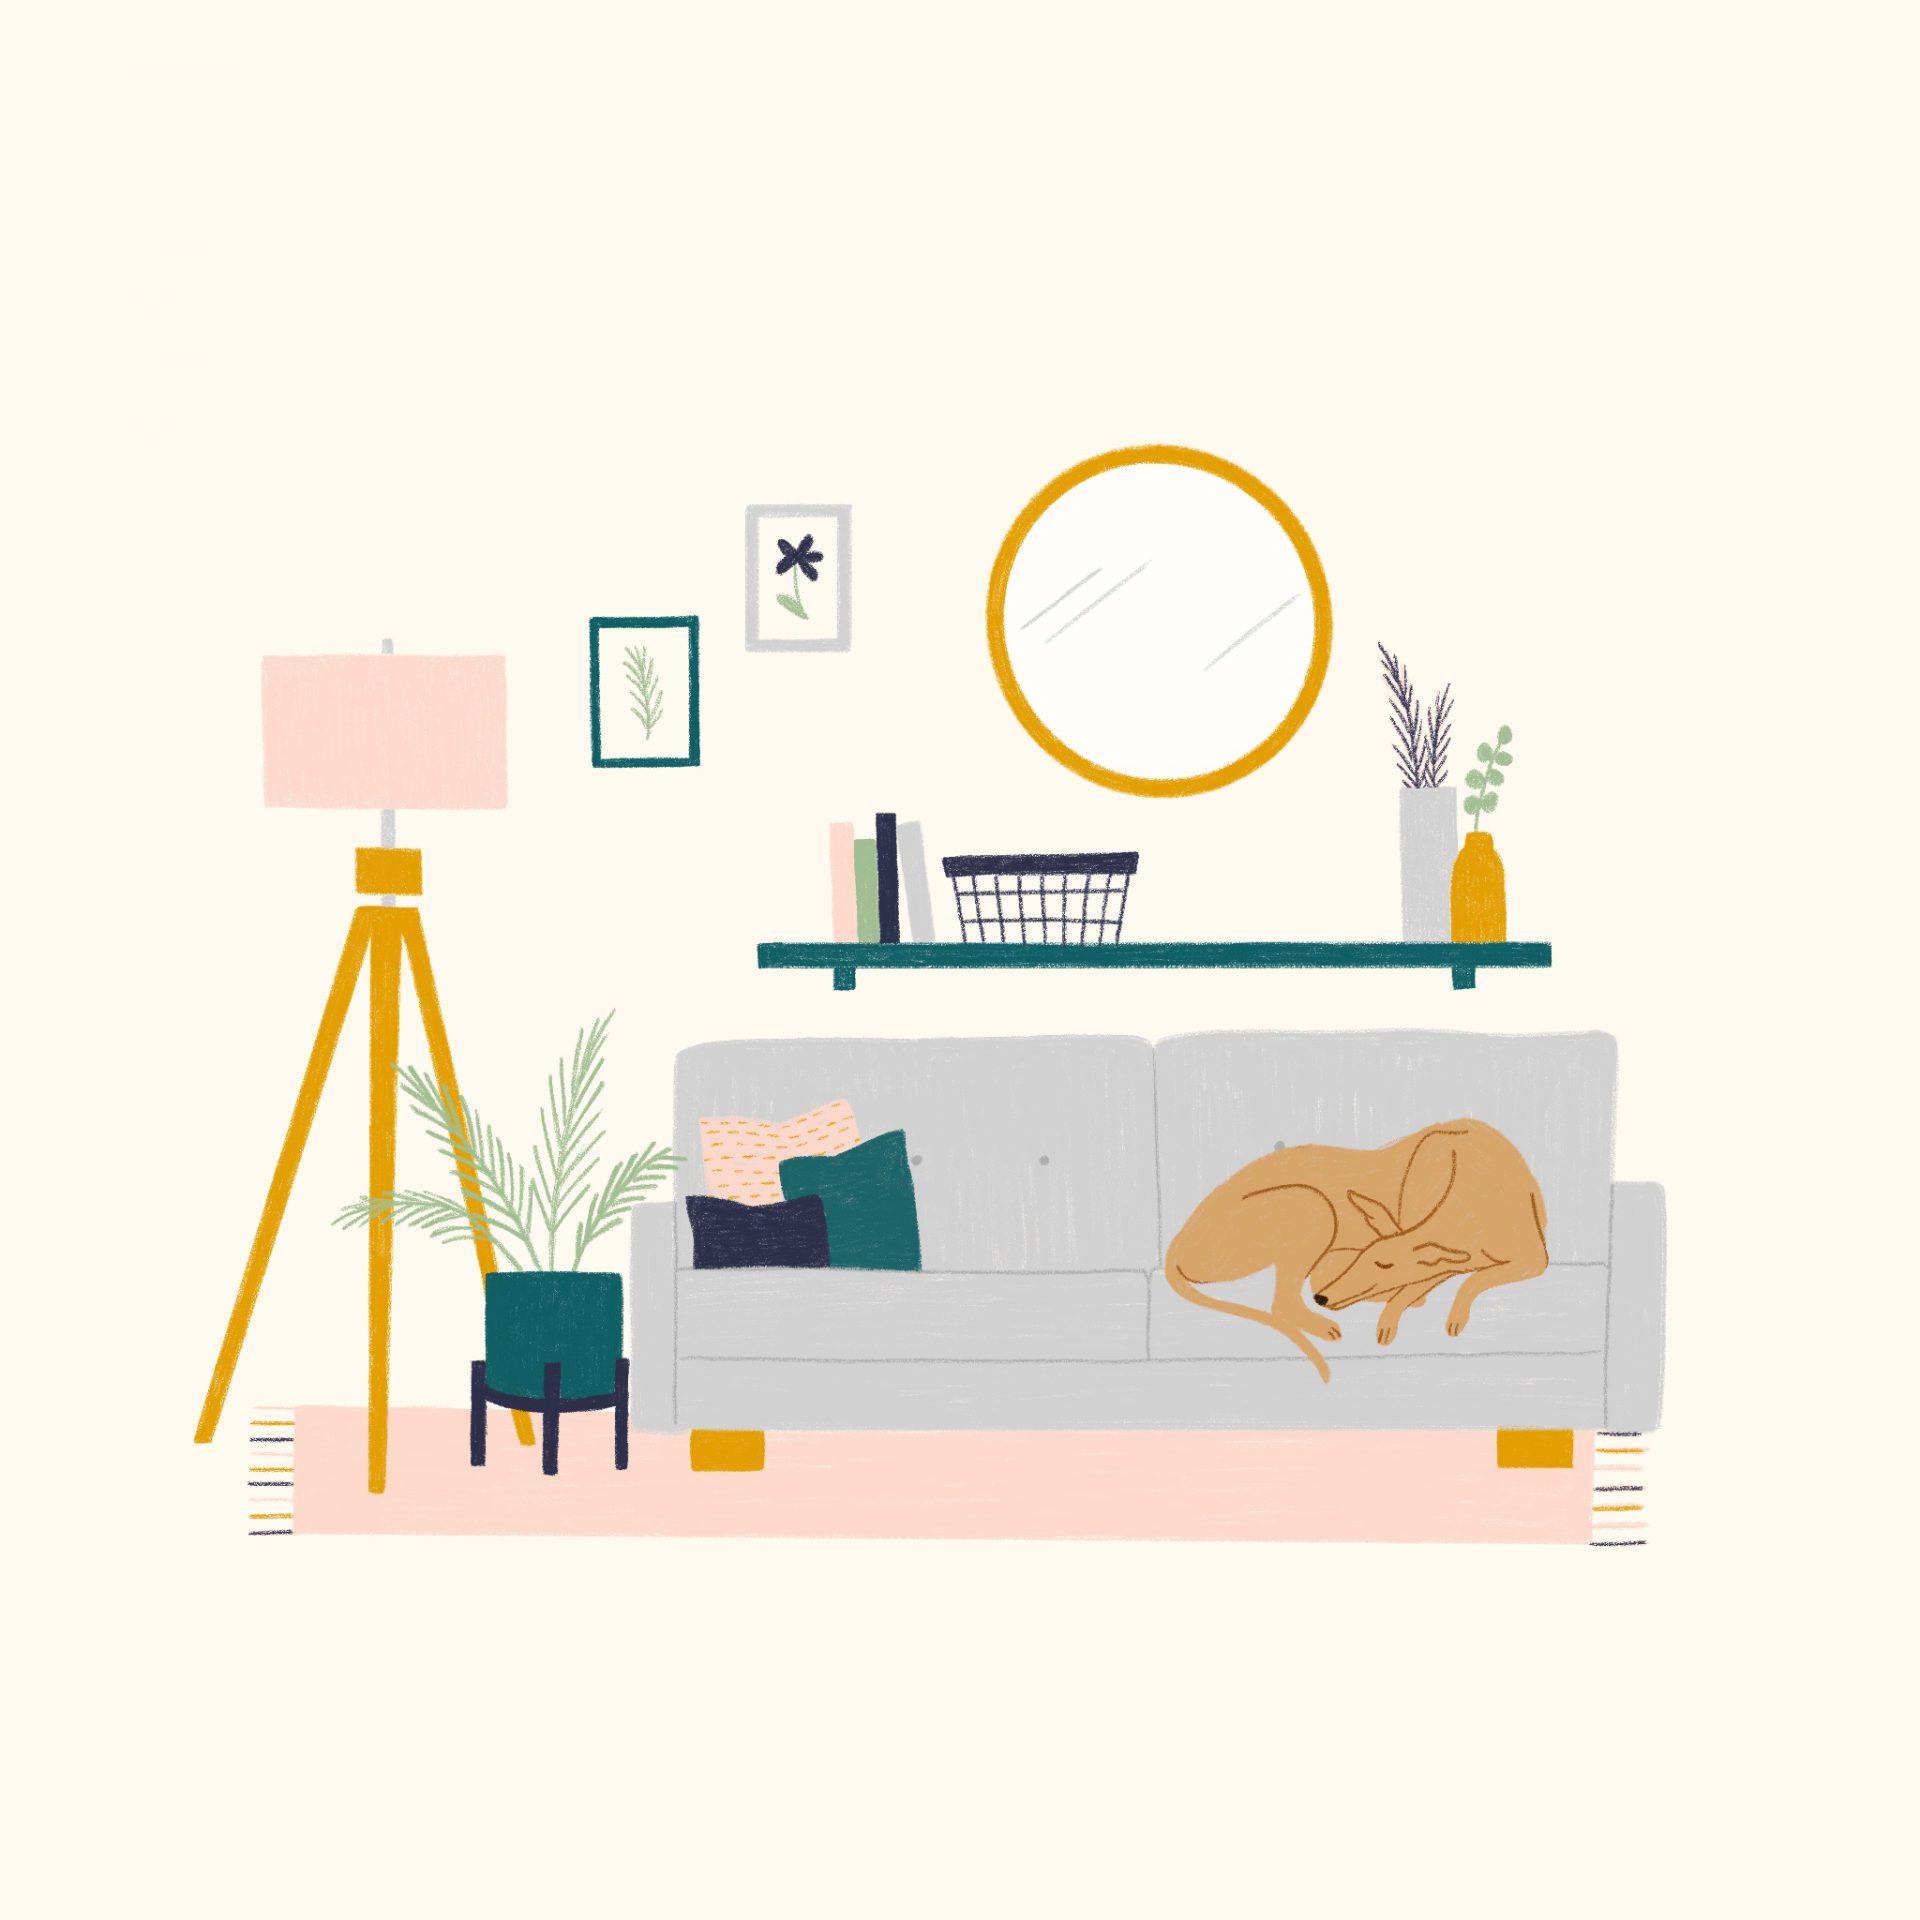 Illustration of a fawn greyhound snoozing on a grey couch in a living room